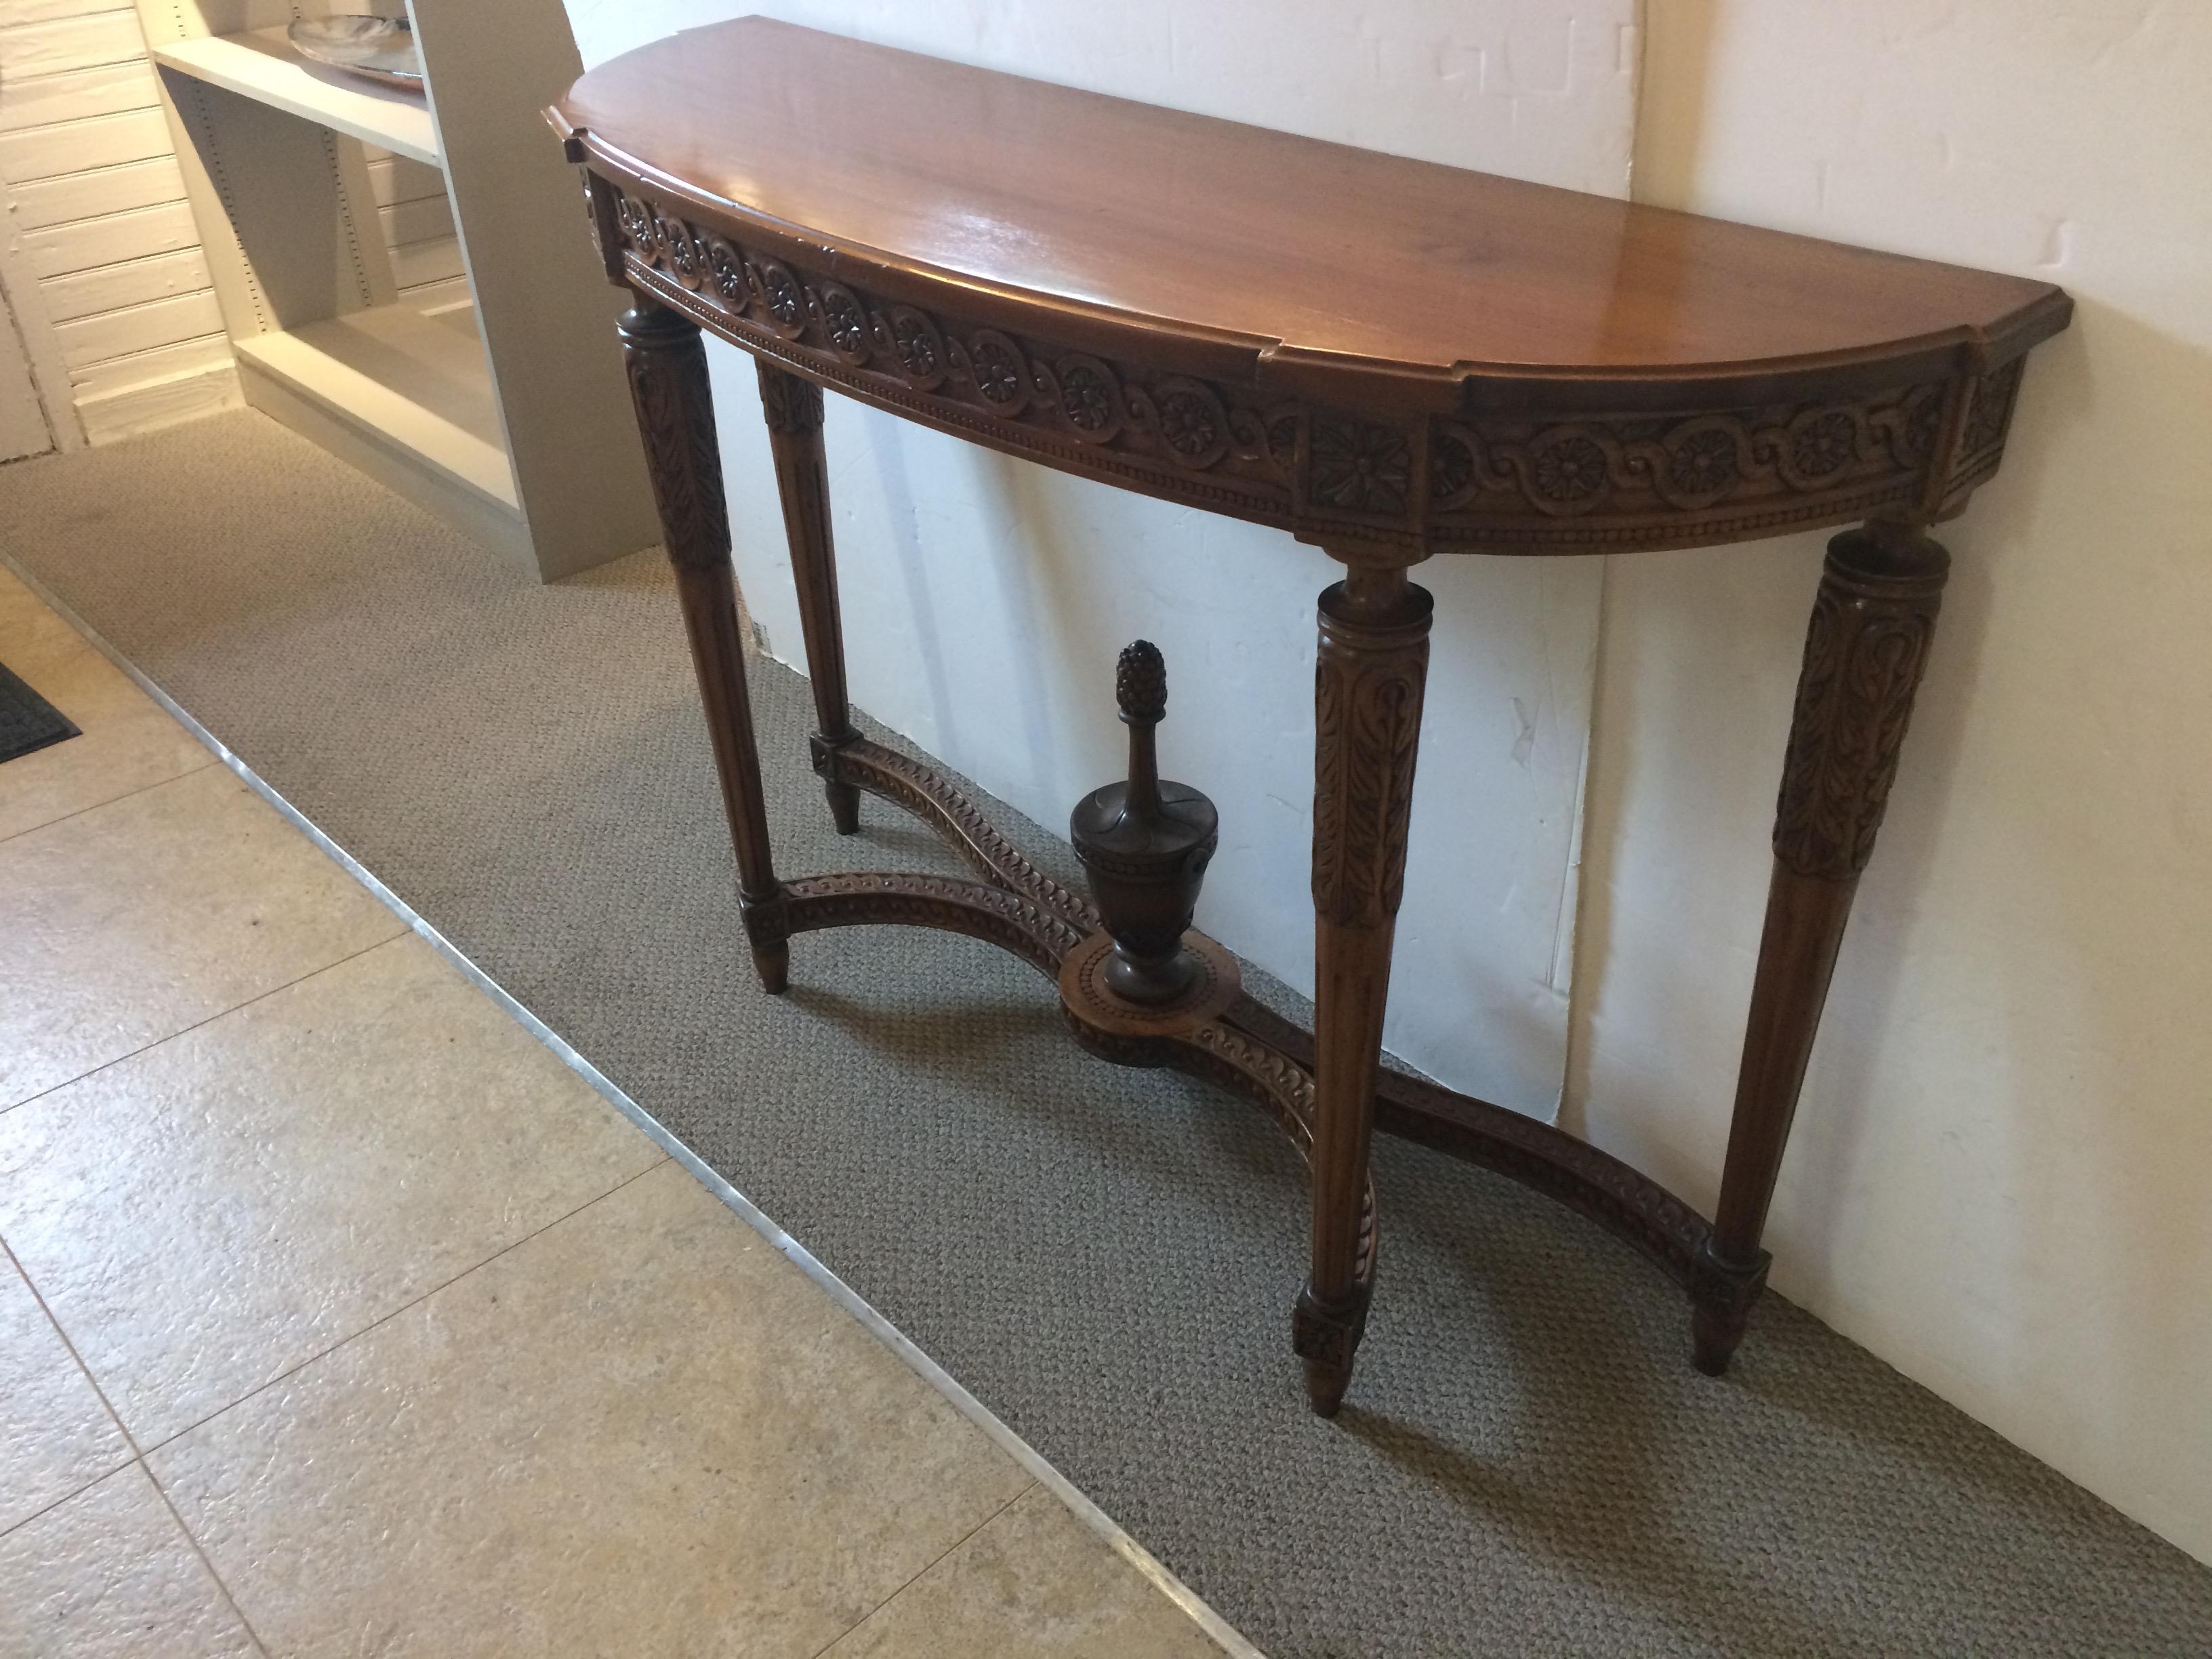 Beautiful narrow carved walnut antique demilune console having gorgeous decorative florets on the apron, reeded elegant legs, and an impressively large urn that rises from the lovely stretcher base at the bottom.